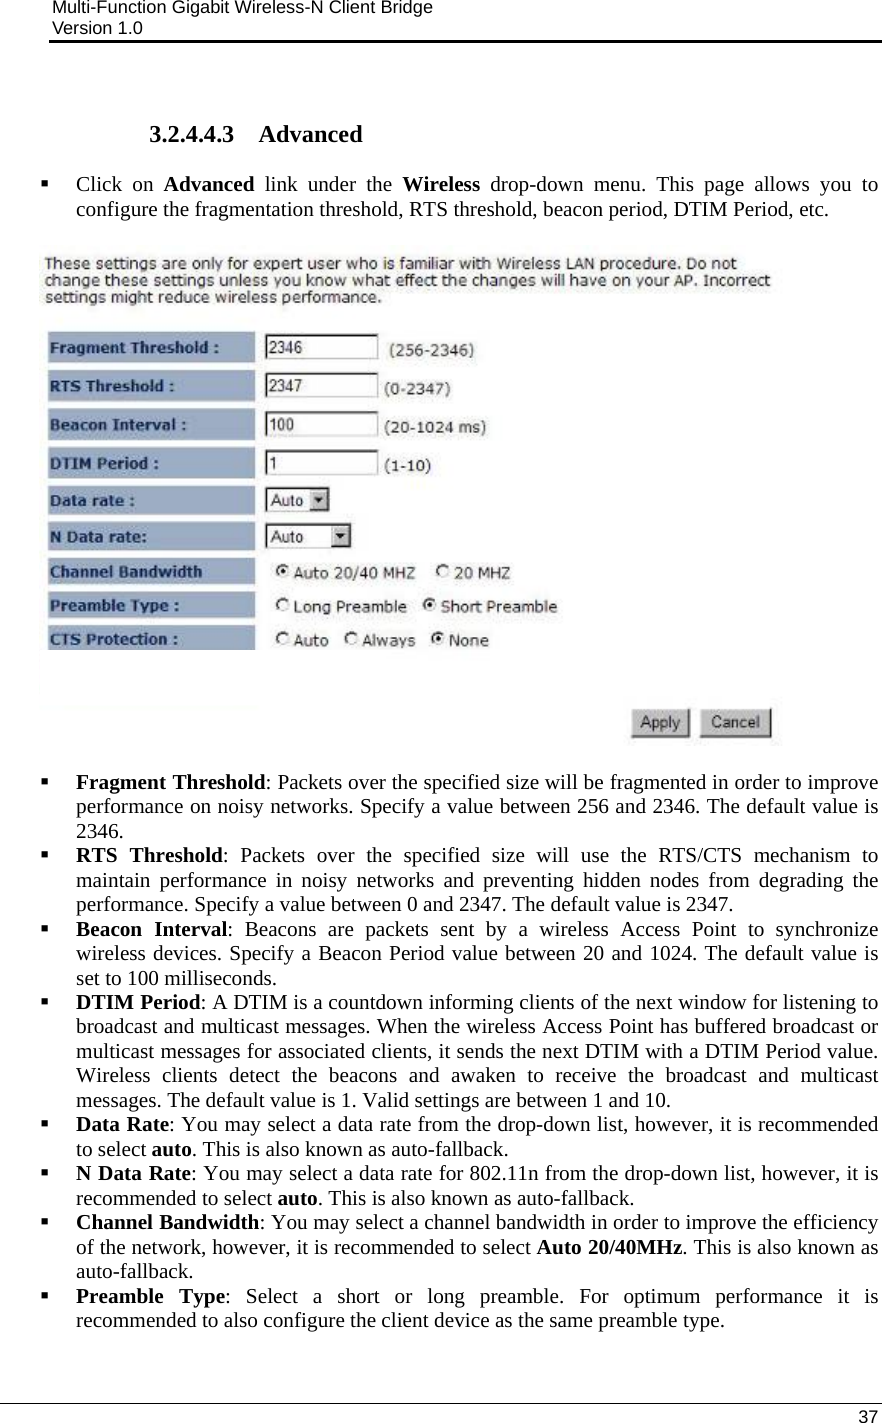 Multi-Function Gigabit Wireless-N Client Bridge                                         Version 1.0    37   3.2.4.4.3 Advanced  Click on Advanced link under the Wireless drop-down menu. This page allows you to configure the fragmentation threshold, RTS threshold, beacon period, DTIM Period, etc.     Fragment Threshold: Packets over the specified size will be fragmented in order to improve performance on noisy networks. Specify a value between 256 and 2346. The default value is 2346.    RTS Threshold: Packets over the specified size will use the RTS/CTS mechanism to maintain performance in noisy networks and preventing hidden nodes from degrading the performance. Specify a value between 0 and 2347. The default value is 2347.  Beacon Interval: Beacons are packets sent by a wireless Access Point to synchronize wireless devices. Specify a Beacon Period value between 20 and 1024. The default value is set to 100 milliseconds.   DTIM Period: A DTIM is a countdown informing clients of the next window for listening to broadcast and multicast messages. When the wireless Access Point has buffered broadcast or multicast messages for associated clients, it sends the next DTIM with a DTIM Period value. Wireless clients detect the beacons and awaken to receive the broadcast and multicast messages. The default value is 1. Valid settings are between 1 and 10.   Data Rate: You may select a data rate from the drop-down list, however, it is recommended to select auto. This is also known as auto-fallback.   N Data Rate: You may select a data rate for 802.11n from the drop-down list, however, it is recommended to select auto. This is also known as auto-fallback.   Channel Bandwidth: You may select a channel bandwidth in order to improve the efficiency of the network, however, it is recommended to select Auto 20/40MHz. This is also known as auto-fallback.   Preamble Type: Select a short or long preamble. For optimum performance it is recommended to also configure the client device as the same preamble type.  